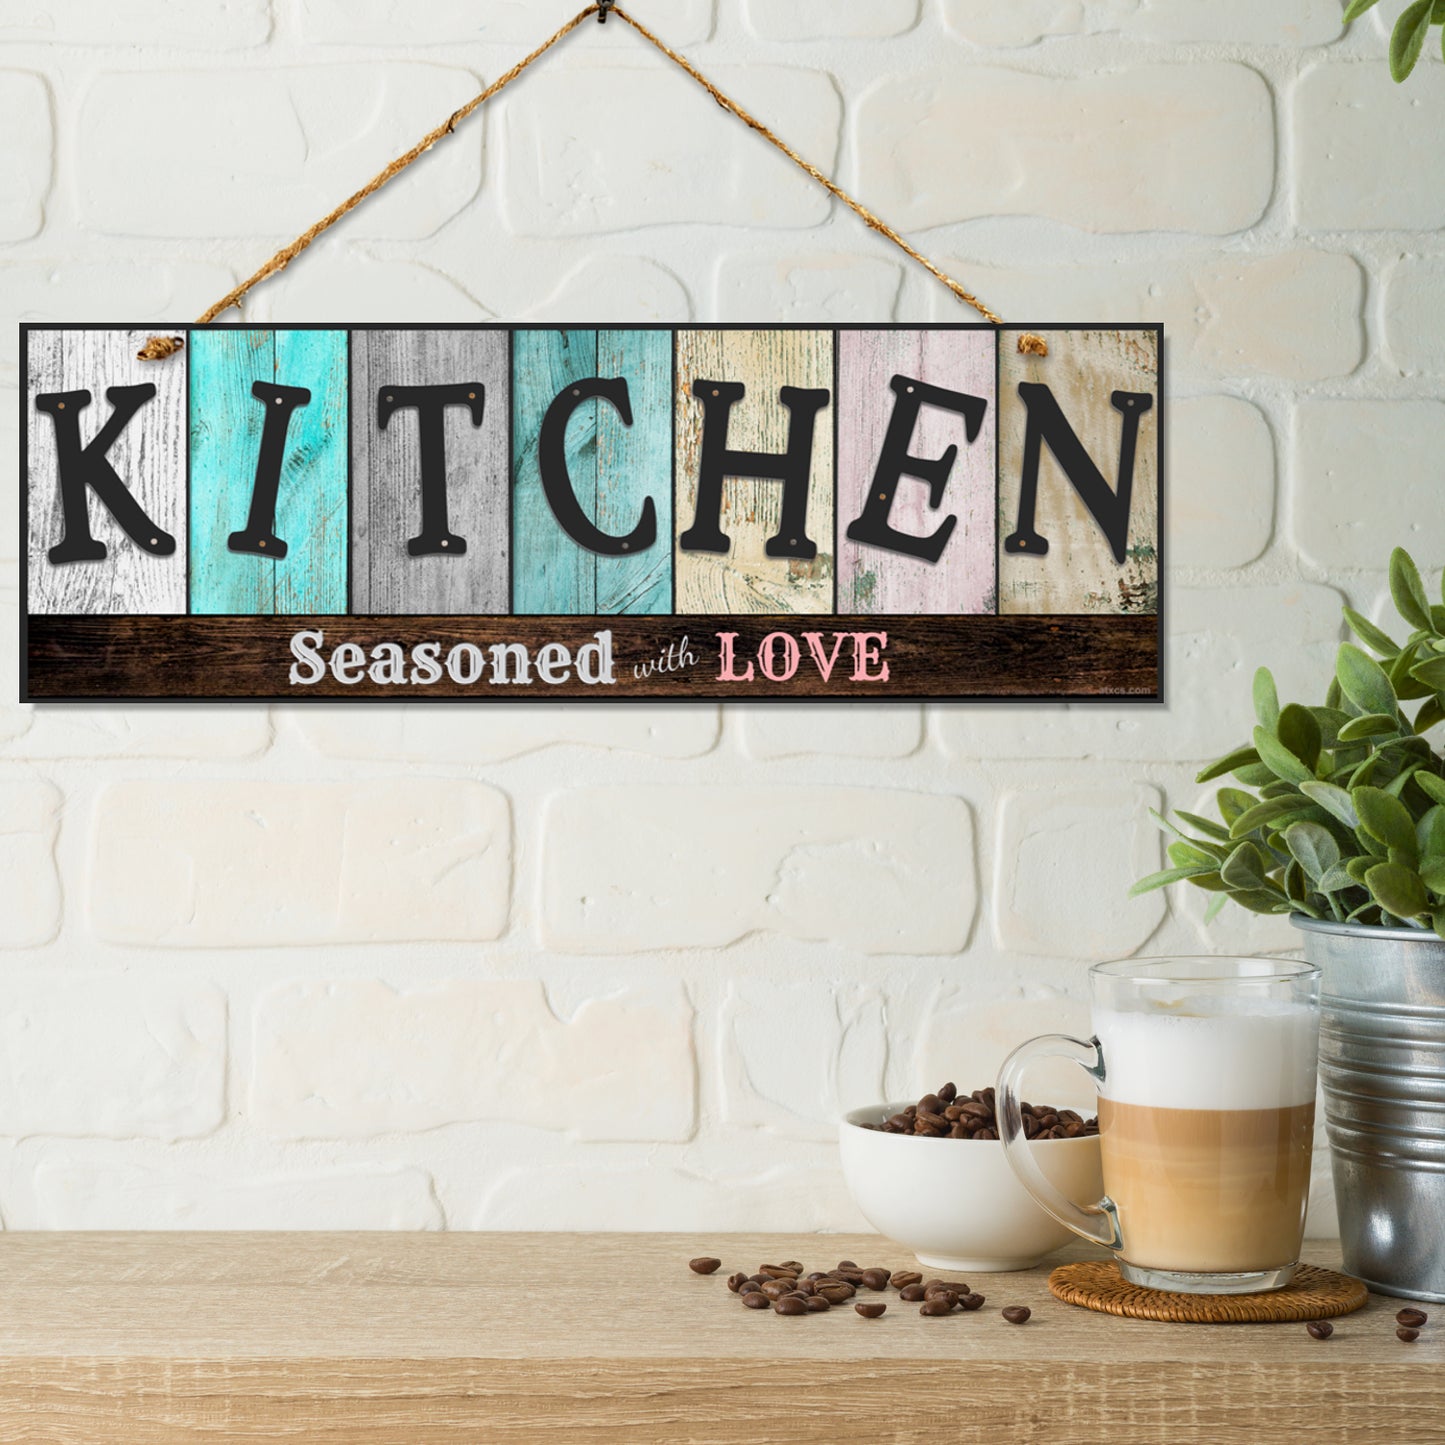 Double Sided Kitchen Sign for Home & Kitchen Decor - Kitchen Seasoned with Love. Colors and Light and Dark Grays - Size 6 x 17.25